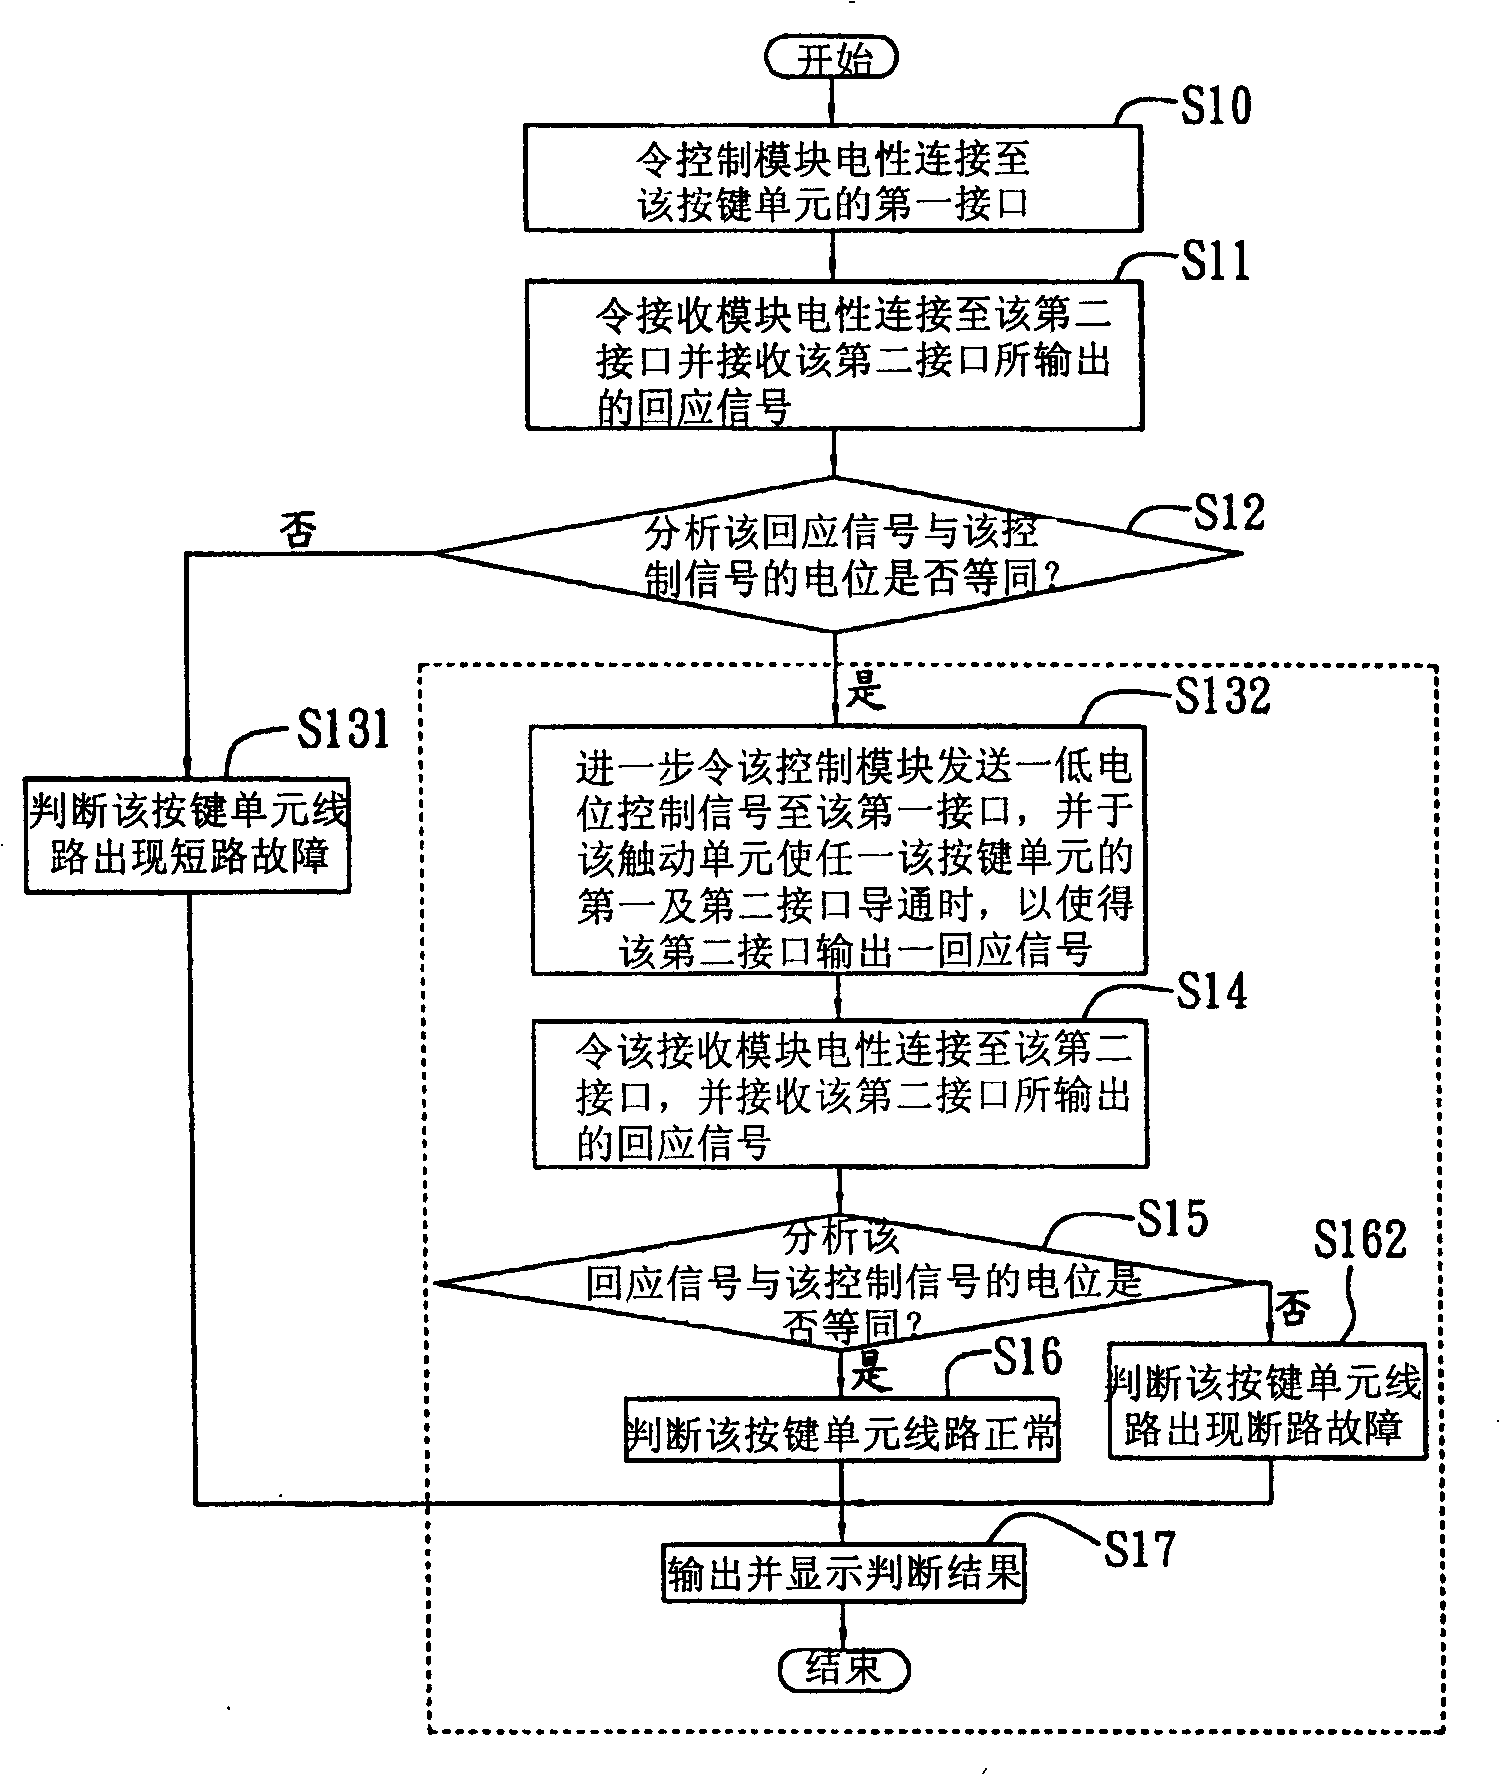 Malfunction detection system and method thereof